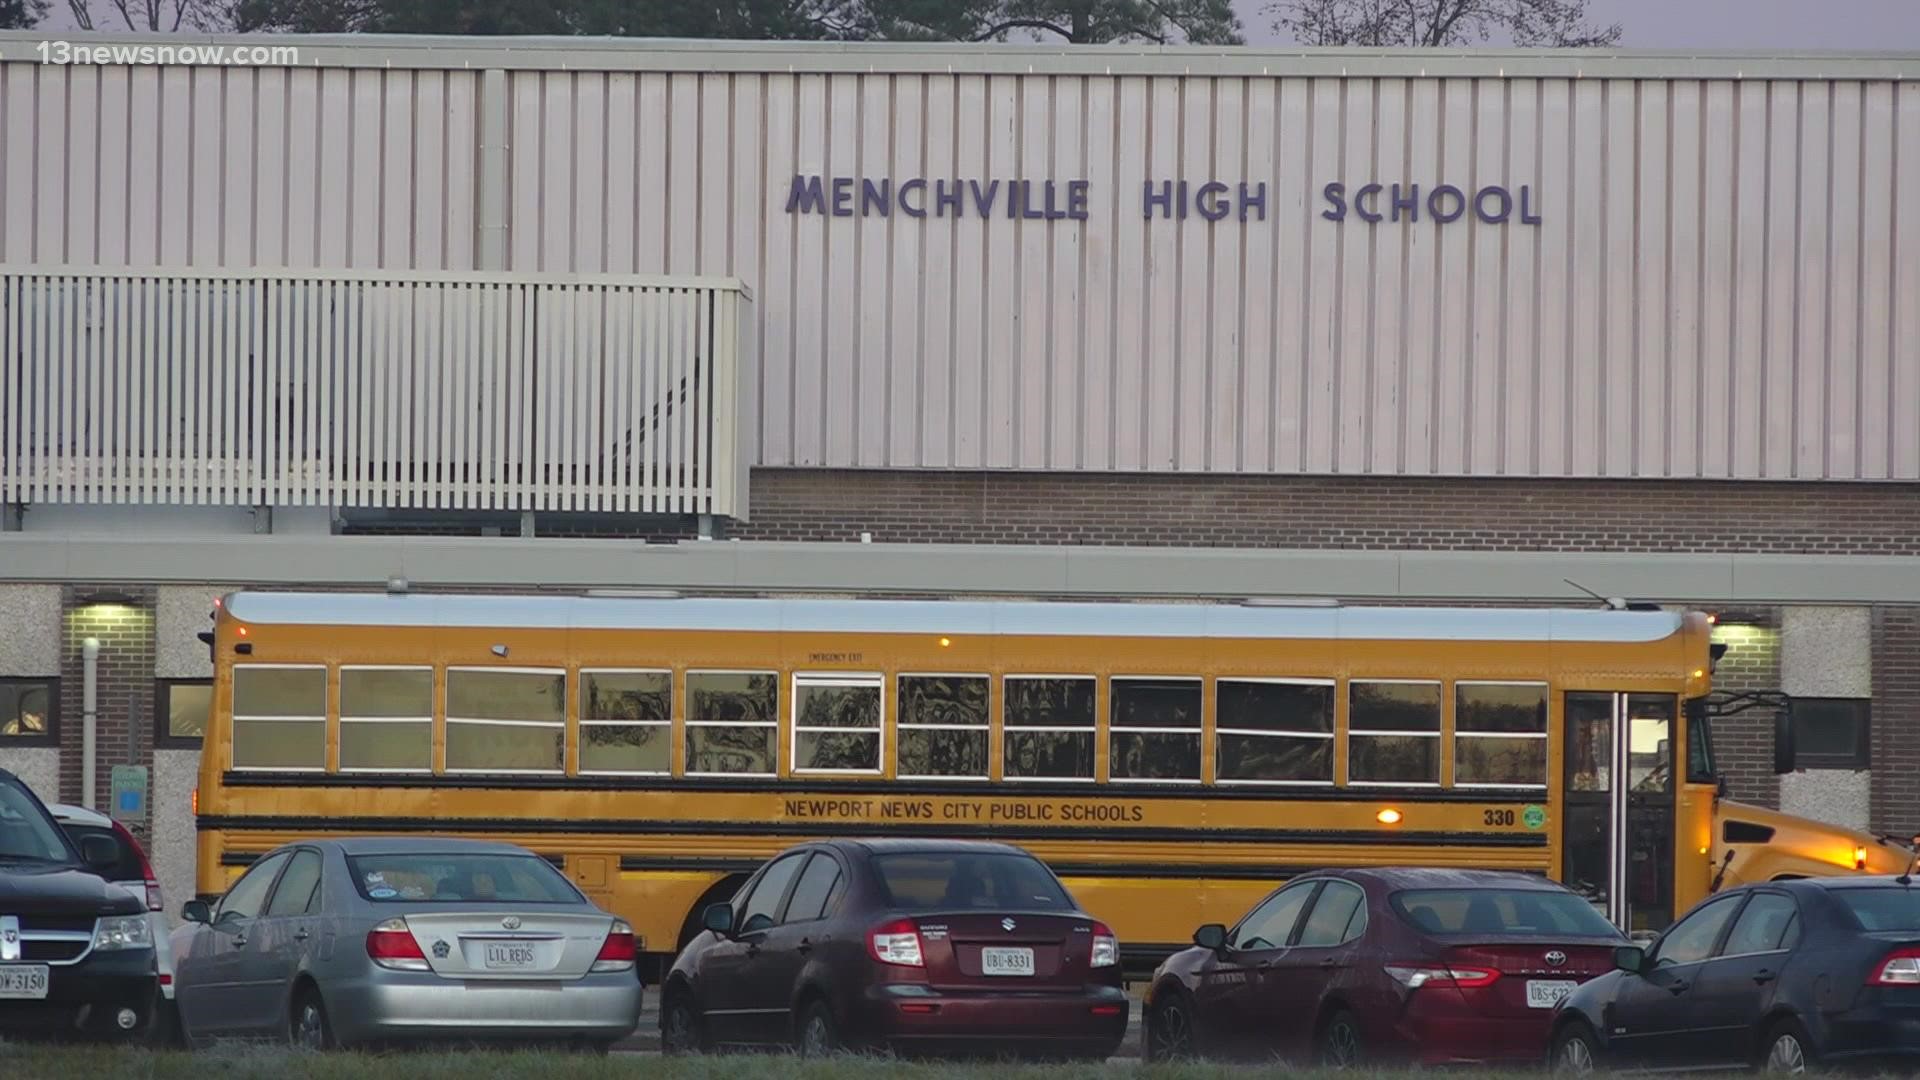 The students at Menchville High School and Woodside High School returned to classes Thursday morning. More security measures were waiting for them.